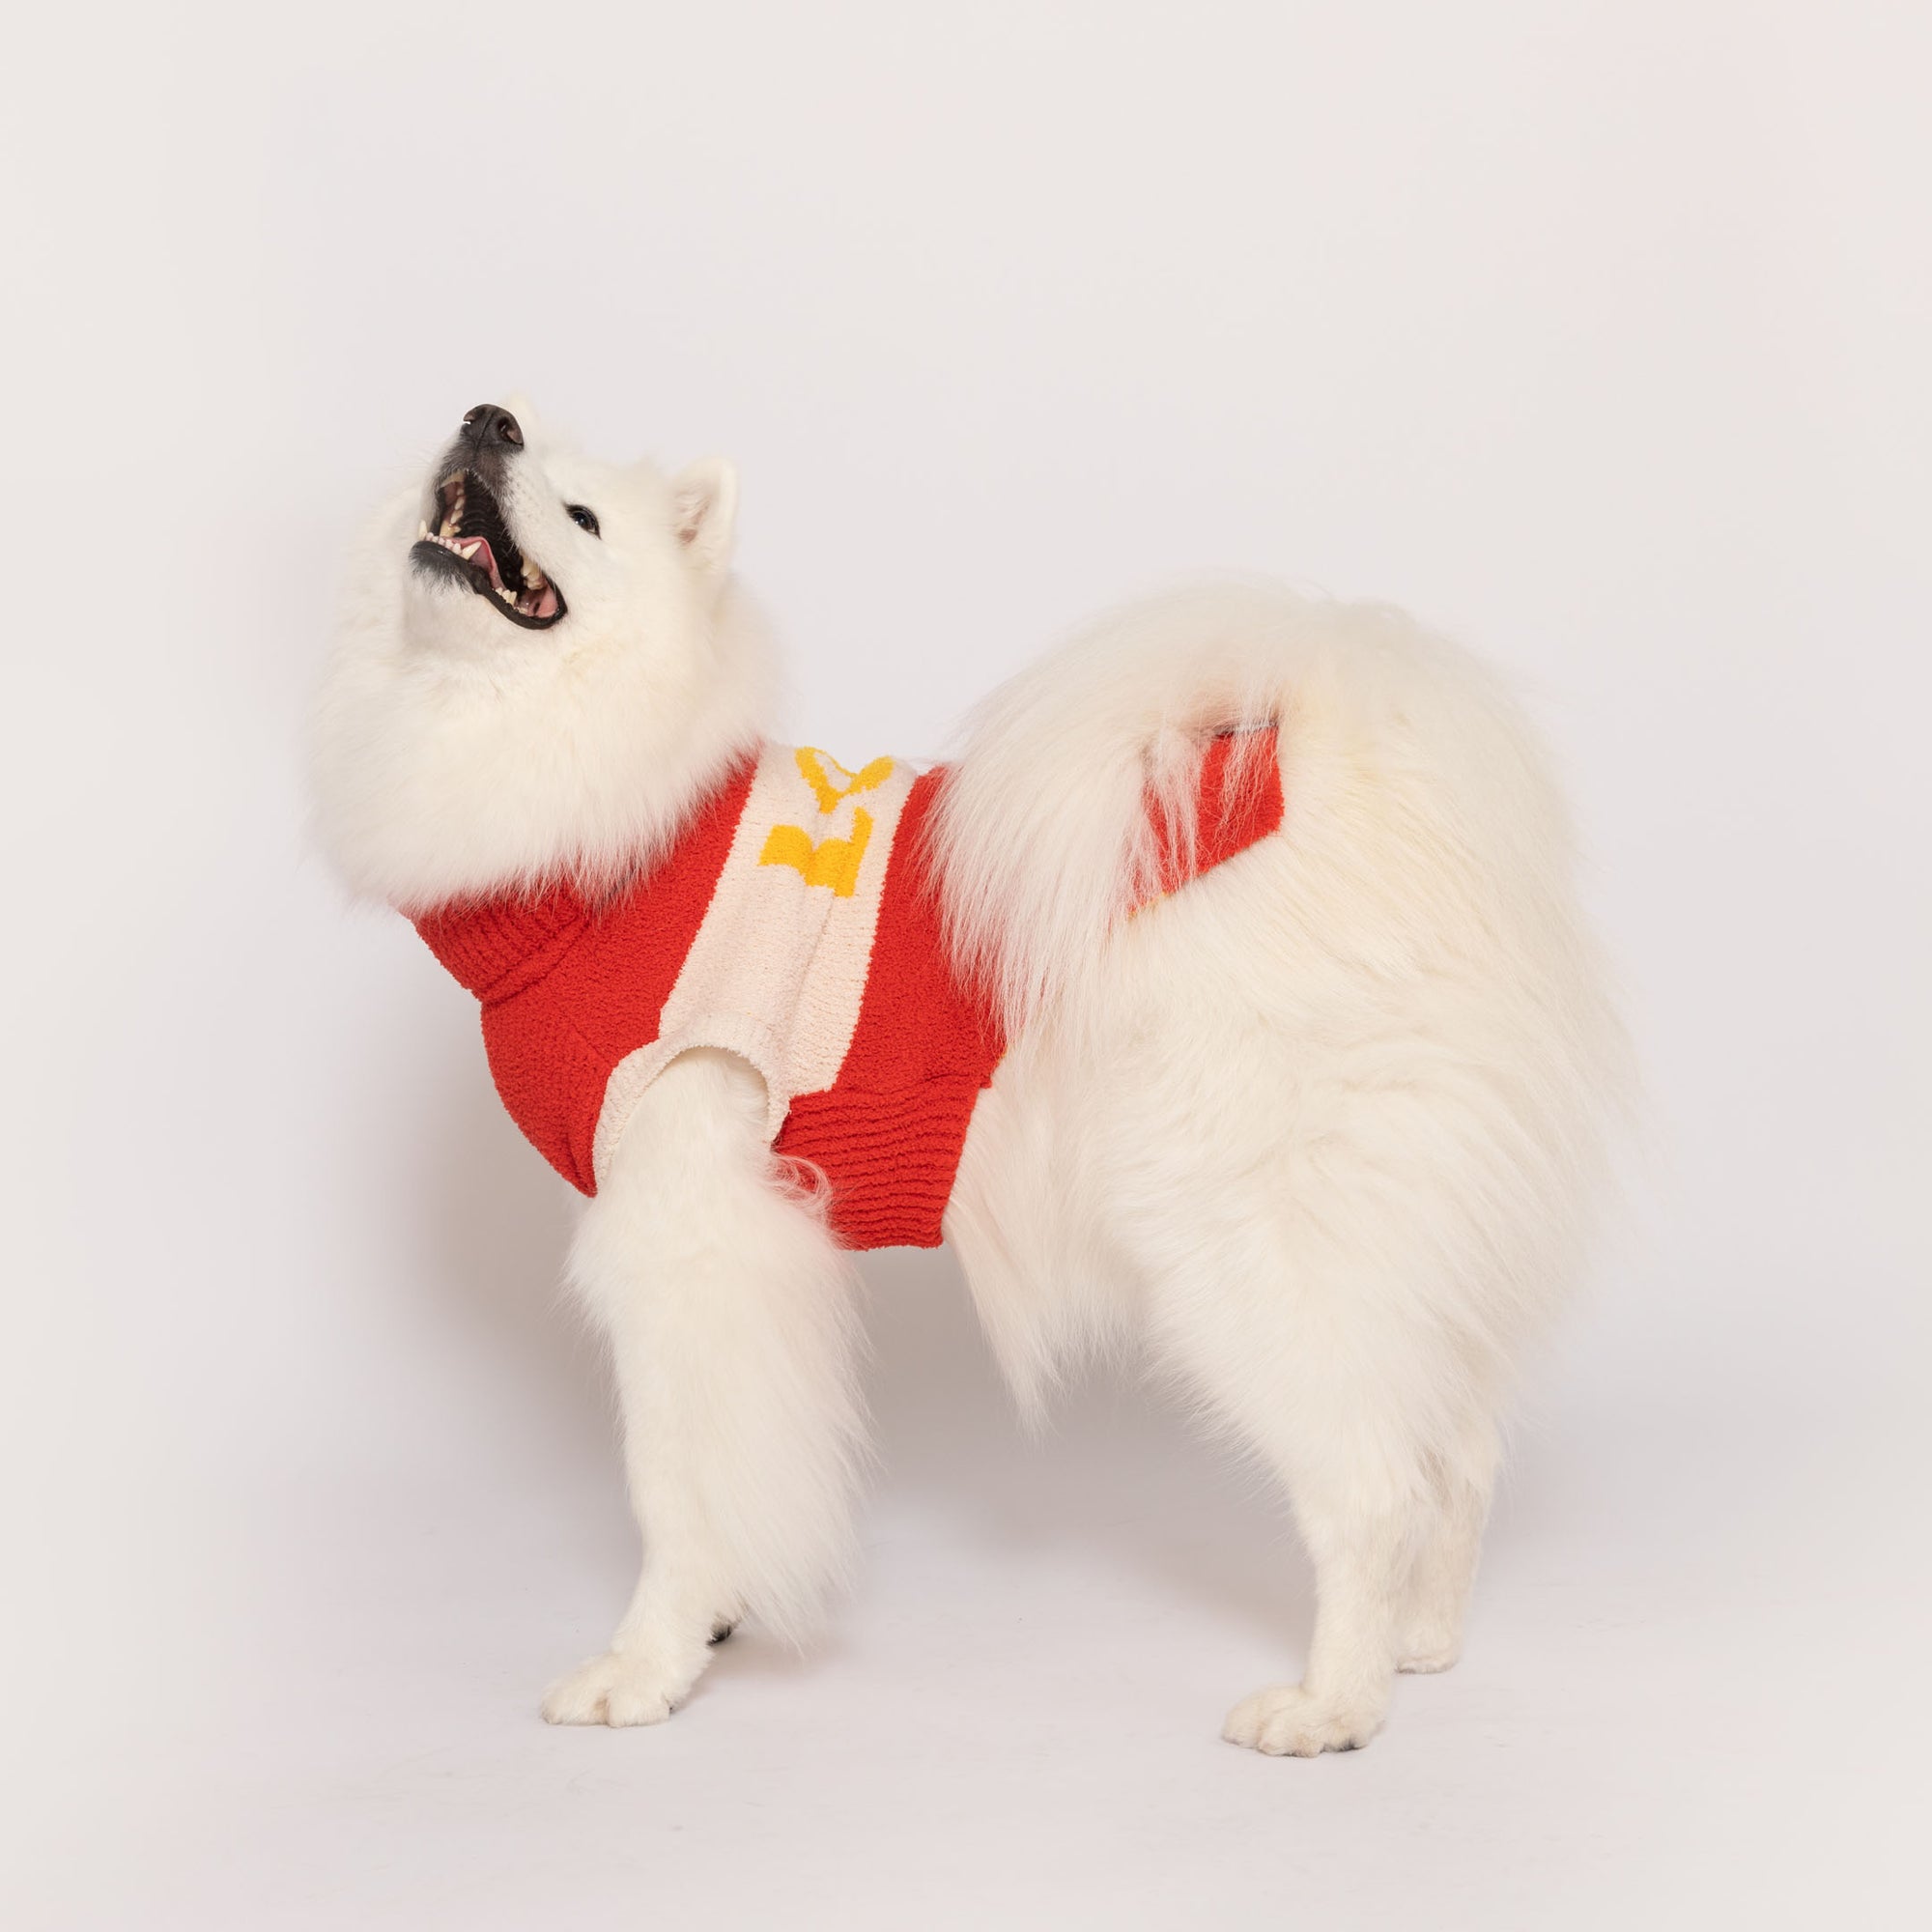 The photograph captures a playful white fluffy dog, possibly a Samoyed, clad in a cozy red and white sweater featuring a yellow motif. The dog is arching its back and looking upwards with an open mouth, conveying a sense of joy or playfulness. Set against a clean white background, the image highlights the dog's vibrant attire and lively spirit.